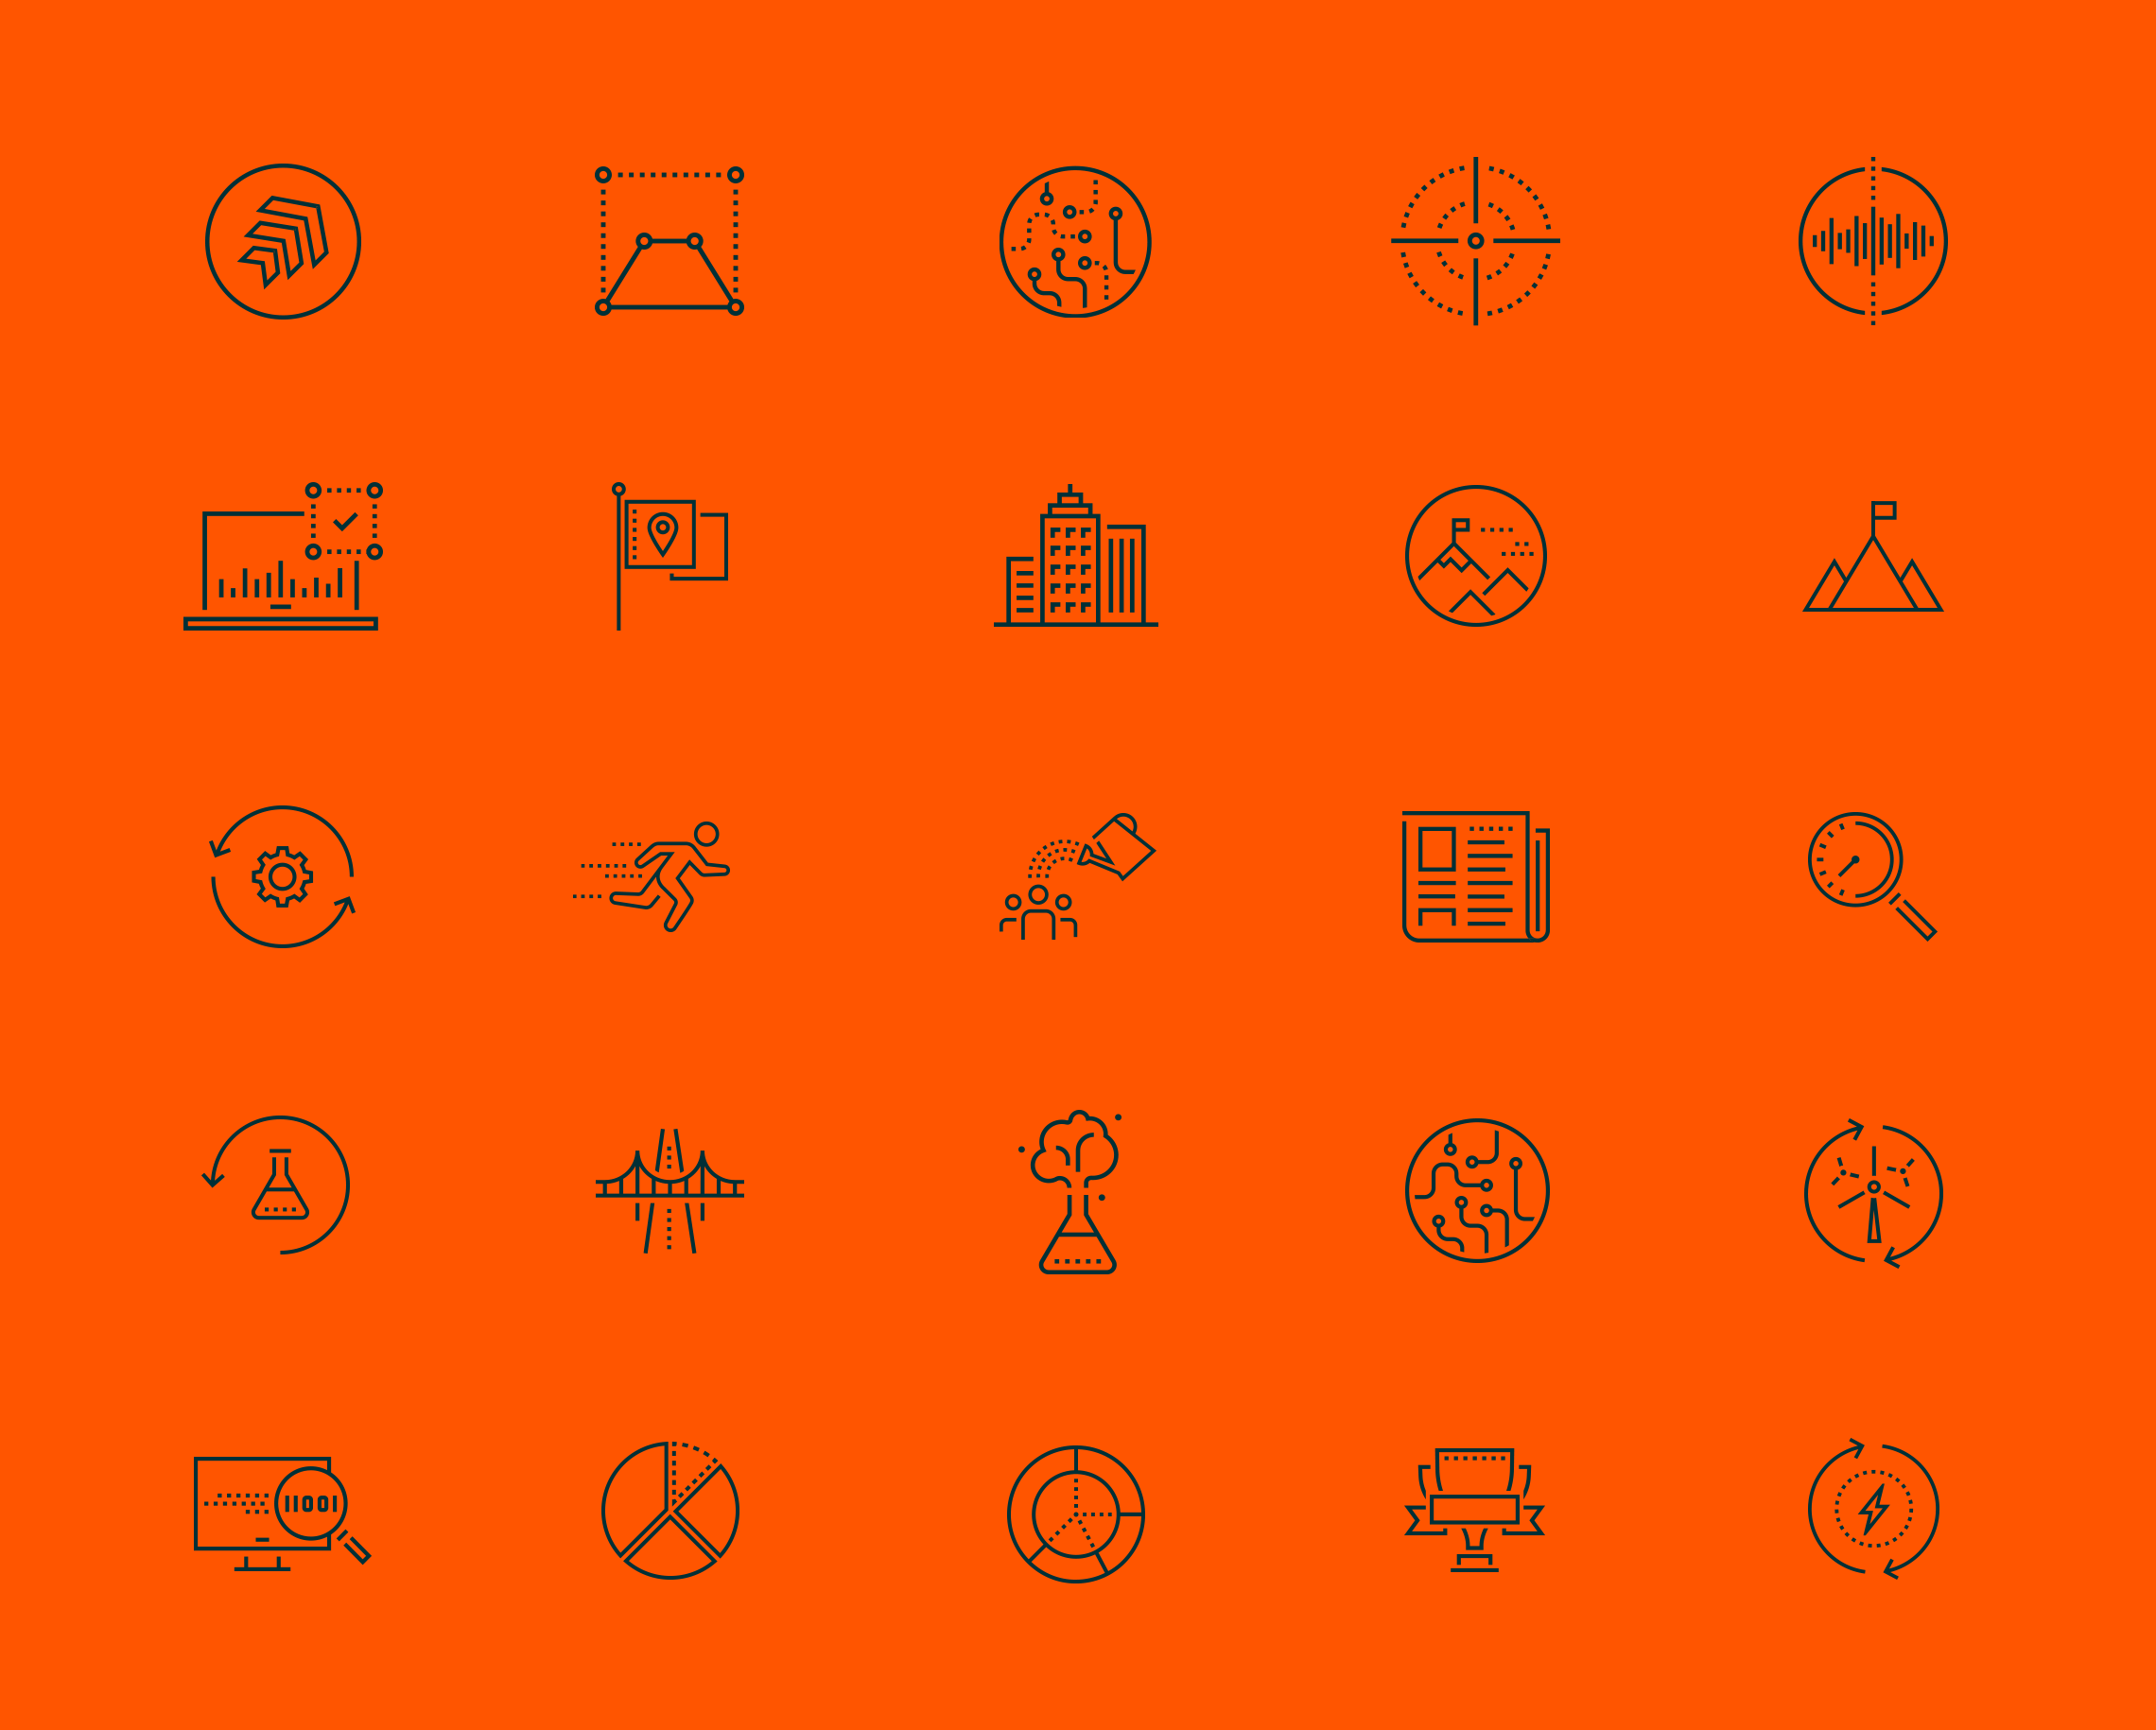 Global X icon design for Mirae Asset